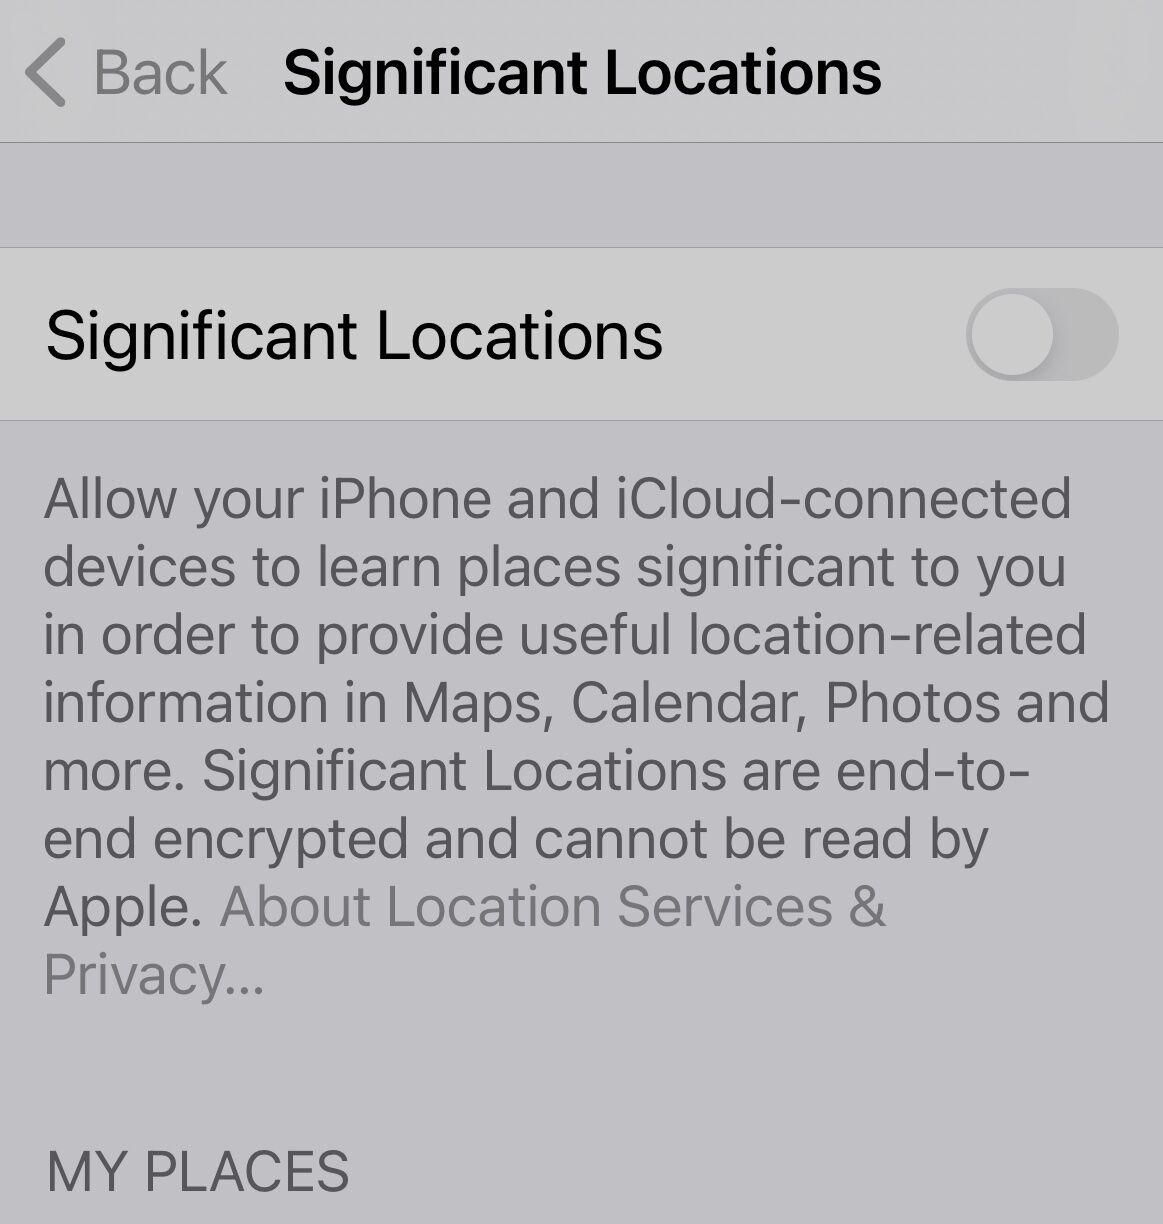 Significant locations on iPhone